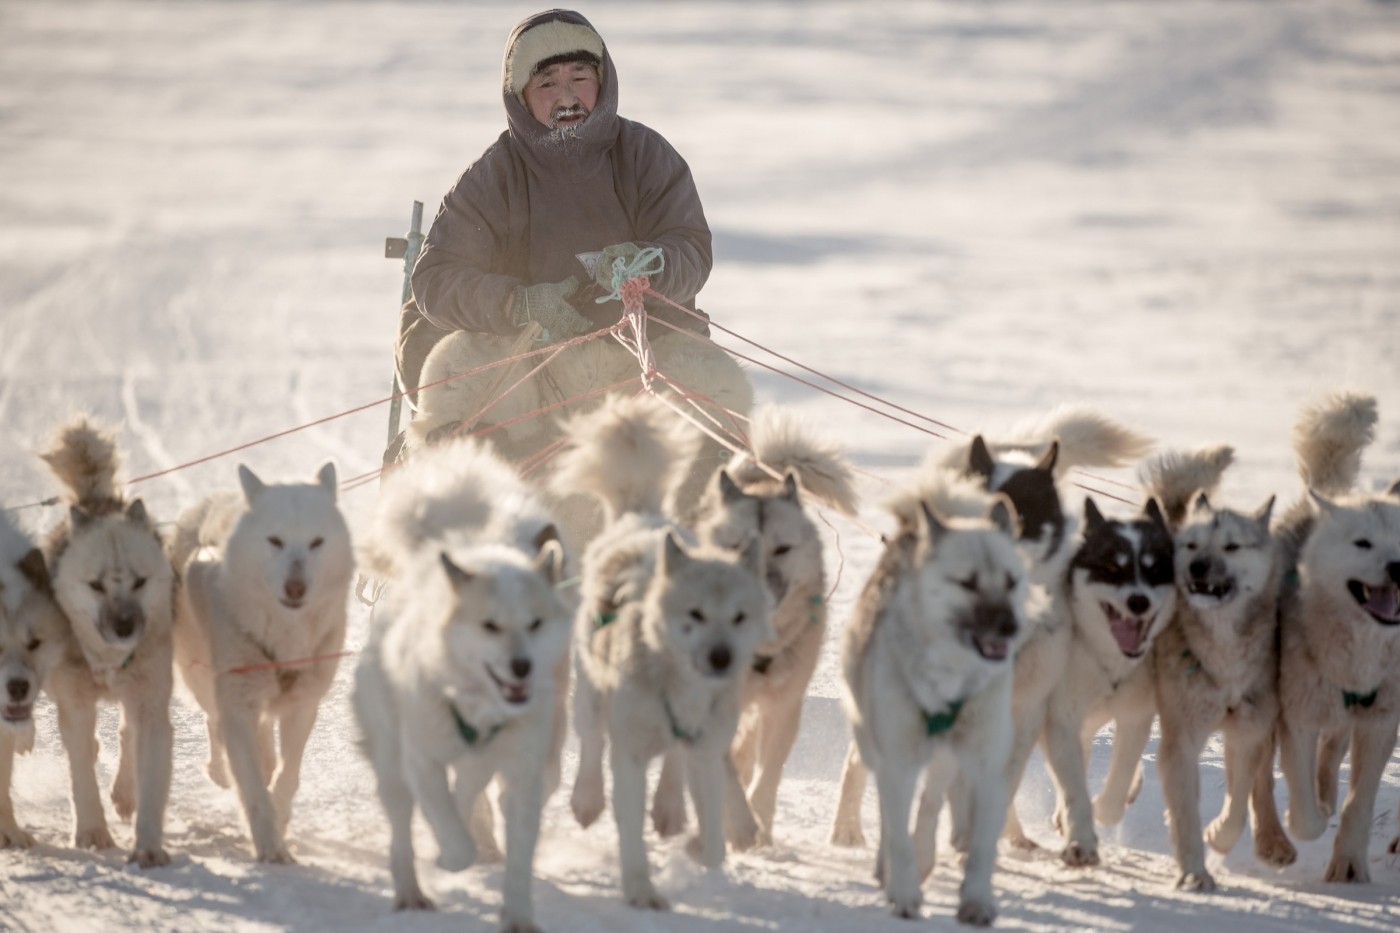 A pack of dogs and their musher on a trail near Ilulissat in Greenland. Photo by Mads Pihl - Visit Greenland